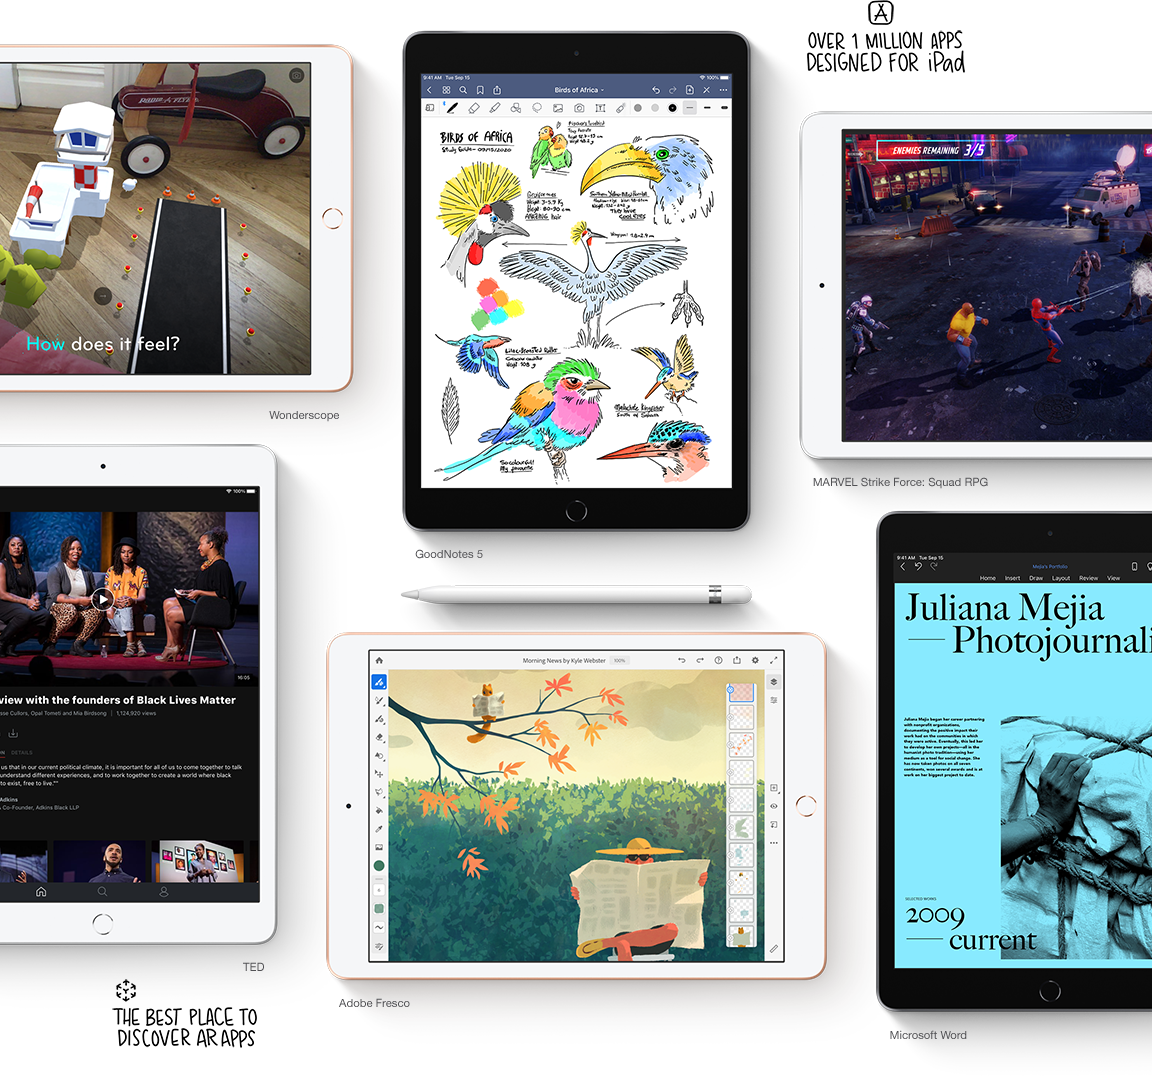 Take advantage of over one million apps just for iPad on the App store.